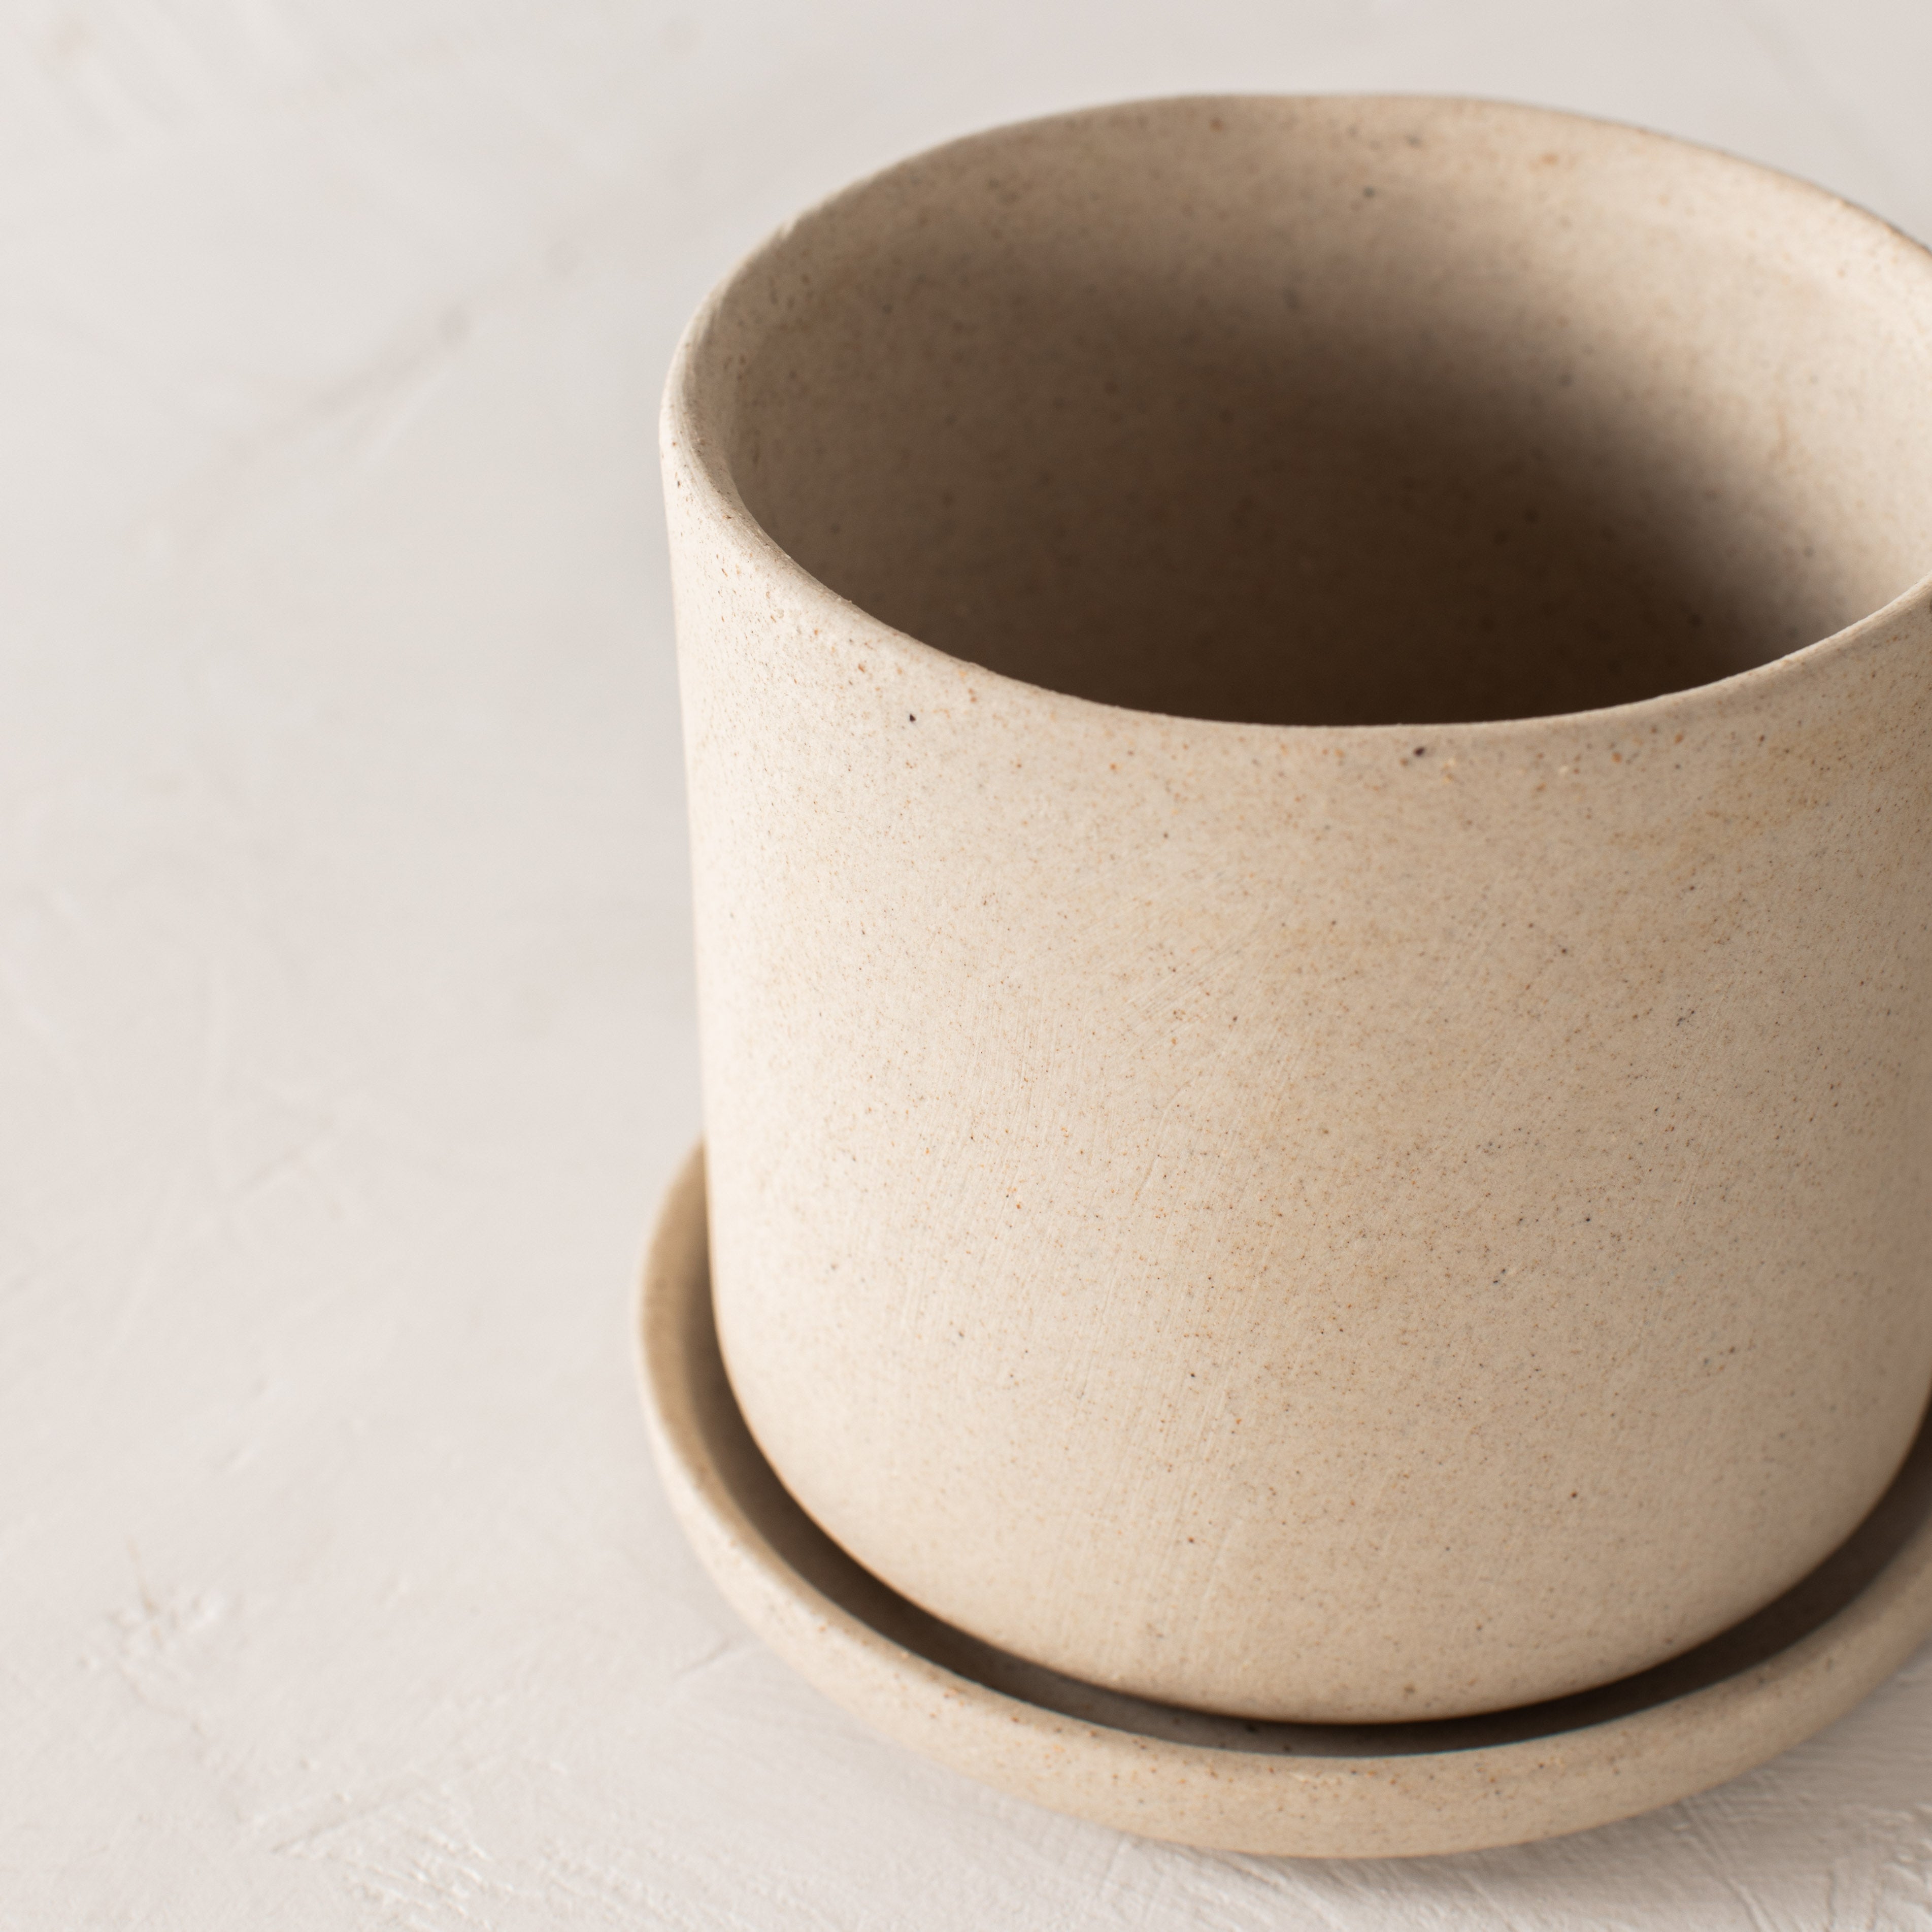 Stoneware minimal ceramic planter with bottom drainage dish. Handmade stoneware ceramic planter, designed by Convivial Production, sold by Shop Verdant Kansas City, Mo plant store.